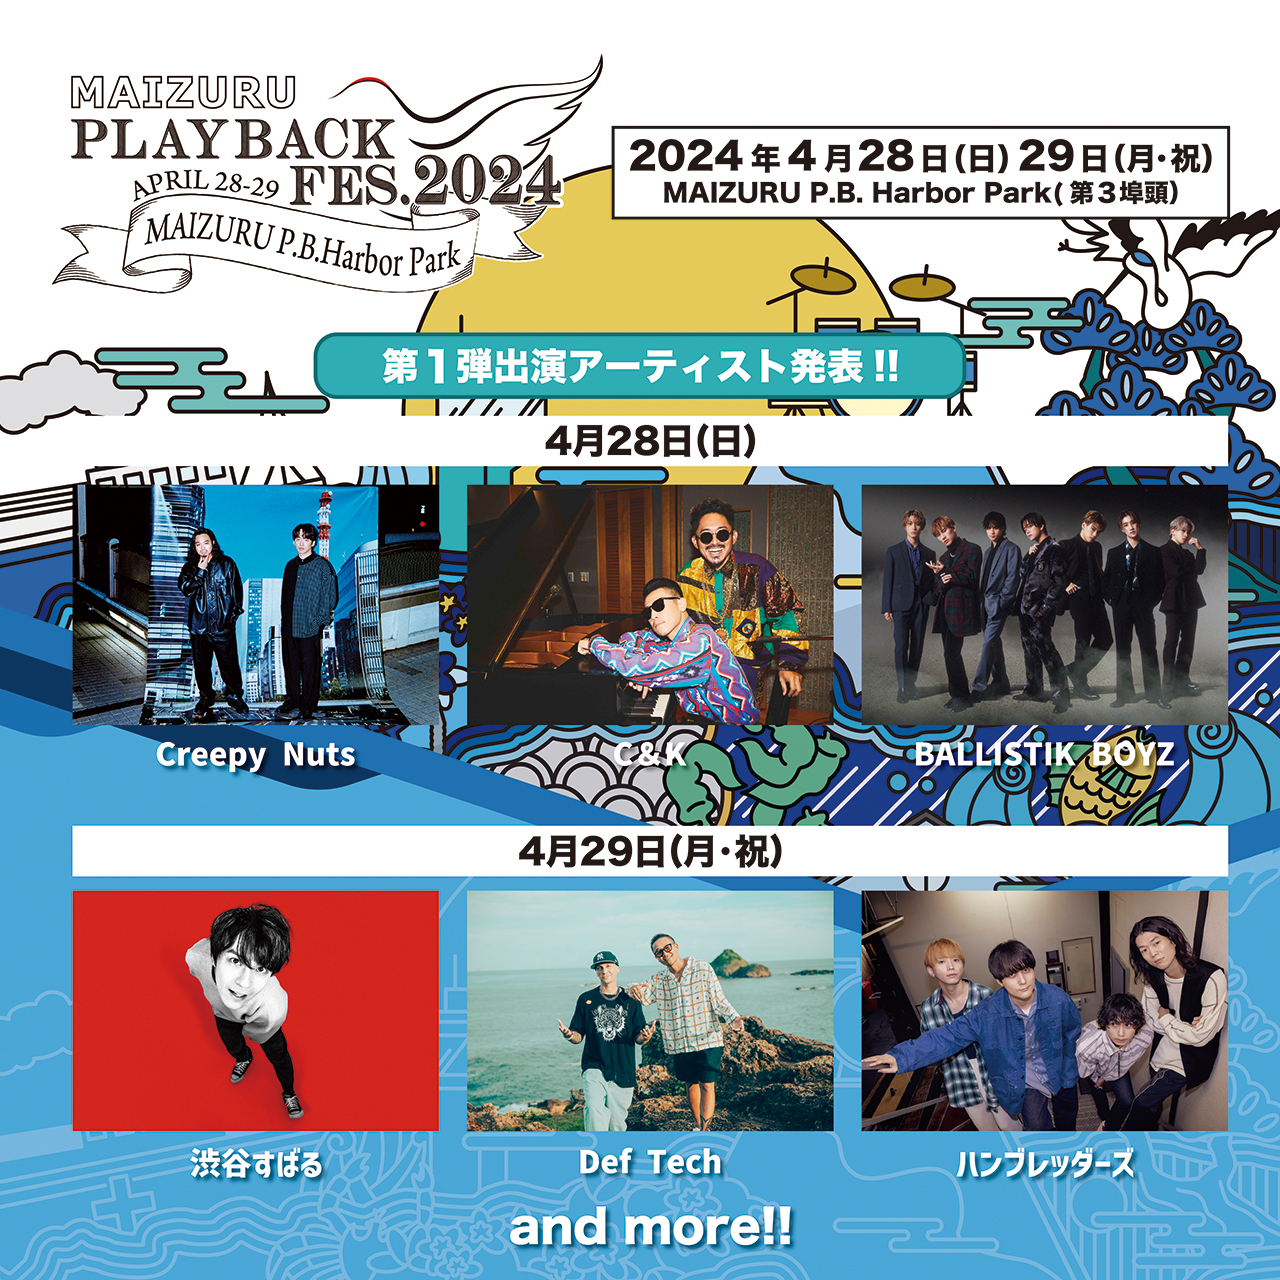 Harbor Stageに出演の6アーティスト&日割り 第1弾発表！！